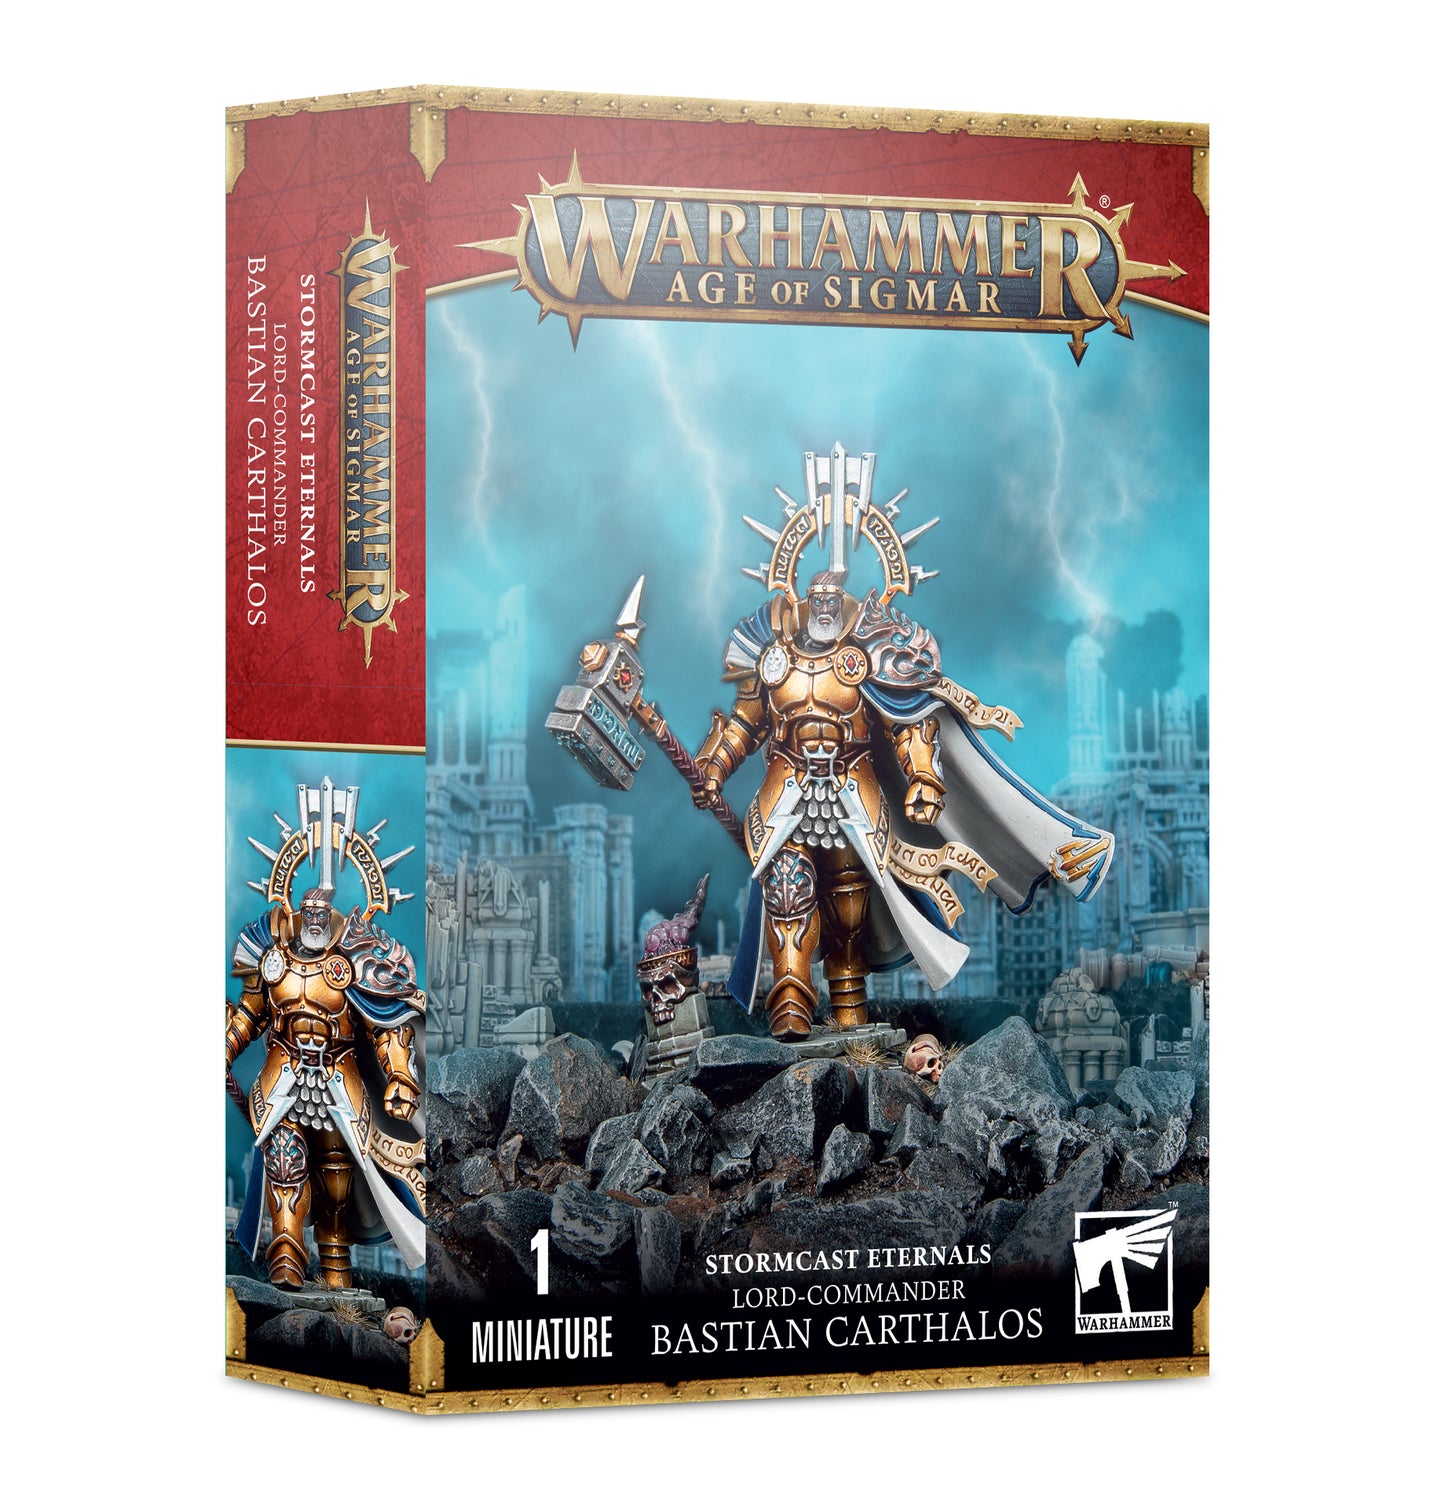 Lord-Commander Bastian Carthalos - Stormcast Eternals - Game On